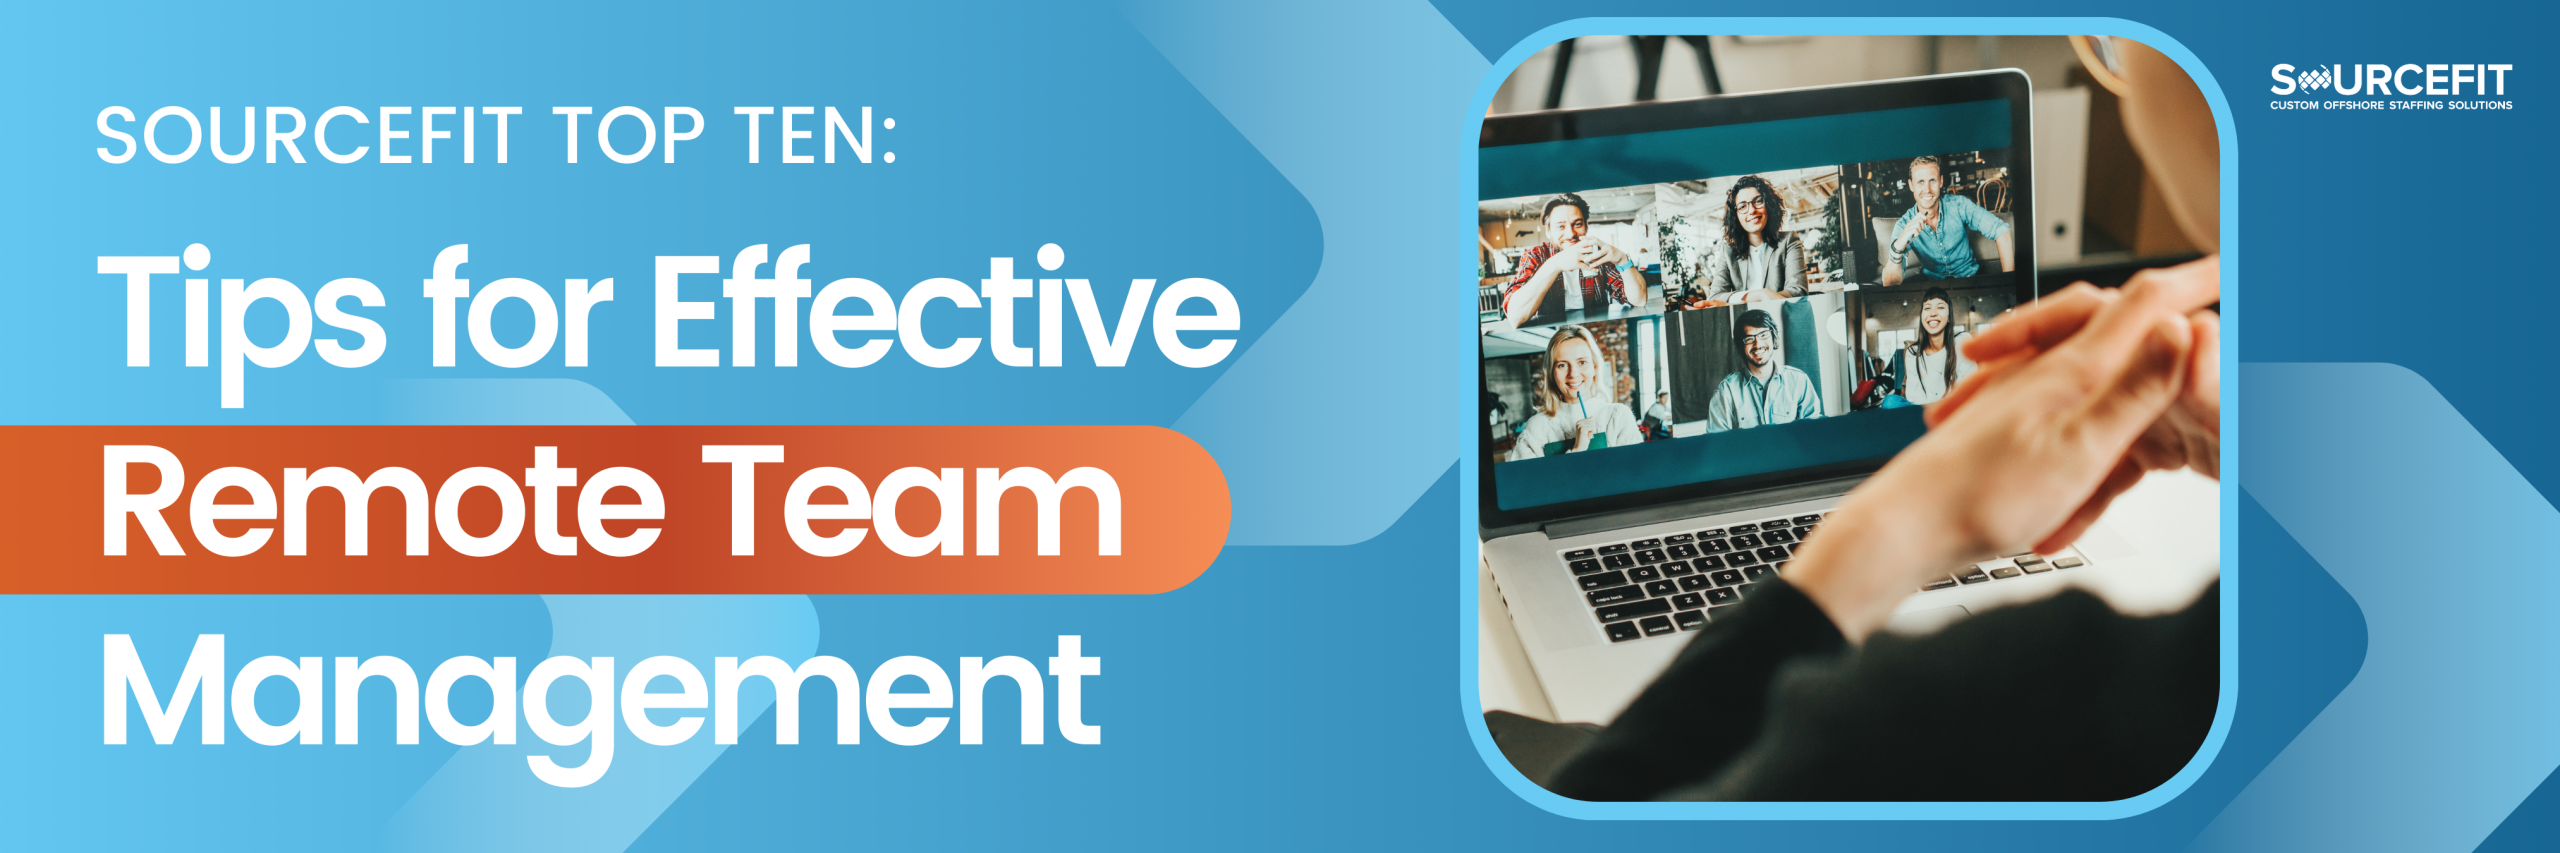 _Sourcefit Top Ten Tips for Effective Remote Team Management